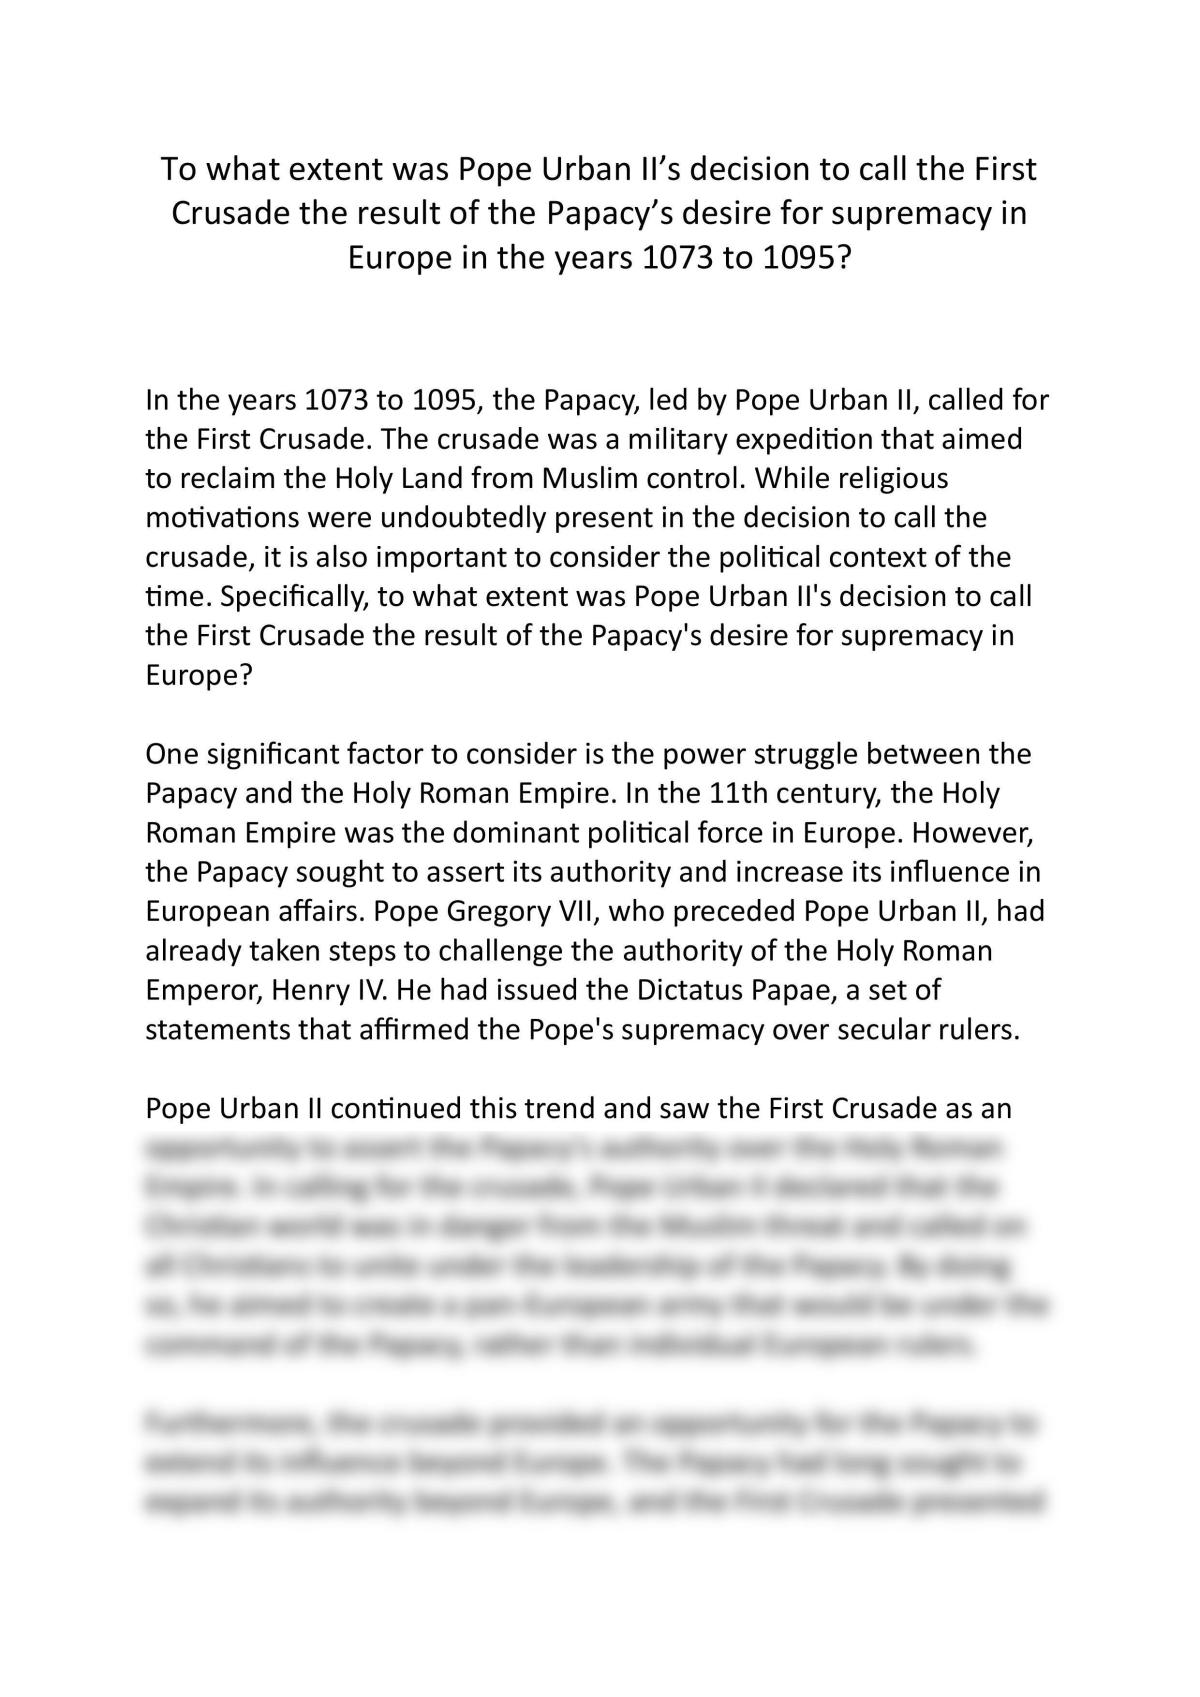 To what extent was Pope Urban II's decision to call the First Crusade the result of the Papacy's desire for supremacy in Europe in the years 1073 to 1095? - Page 1